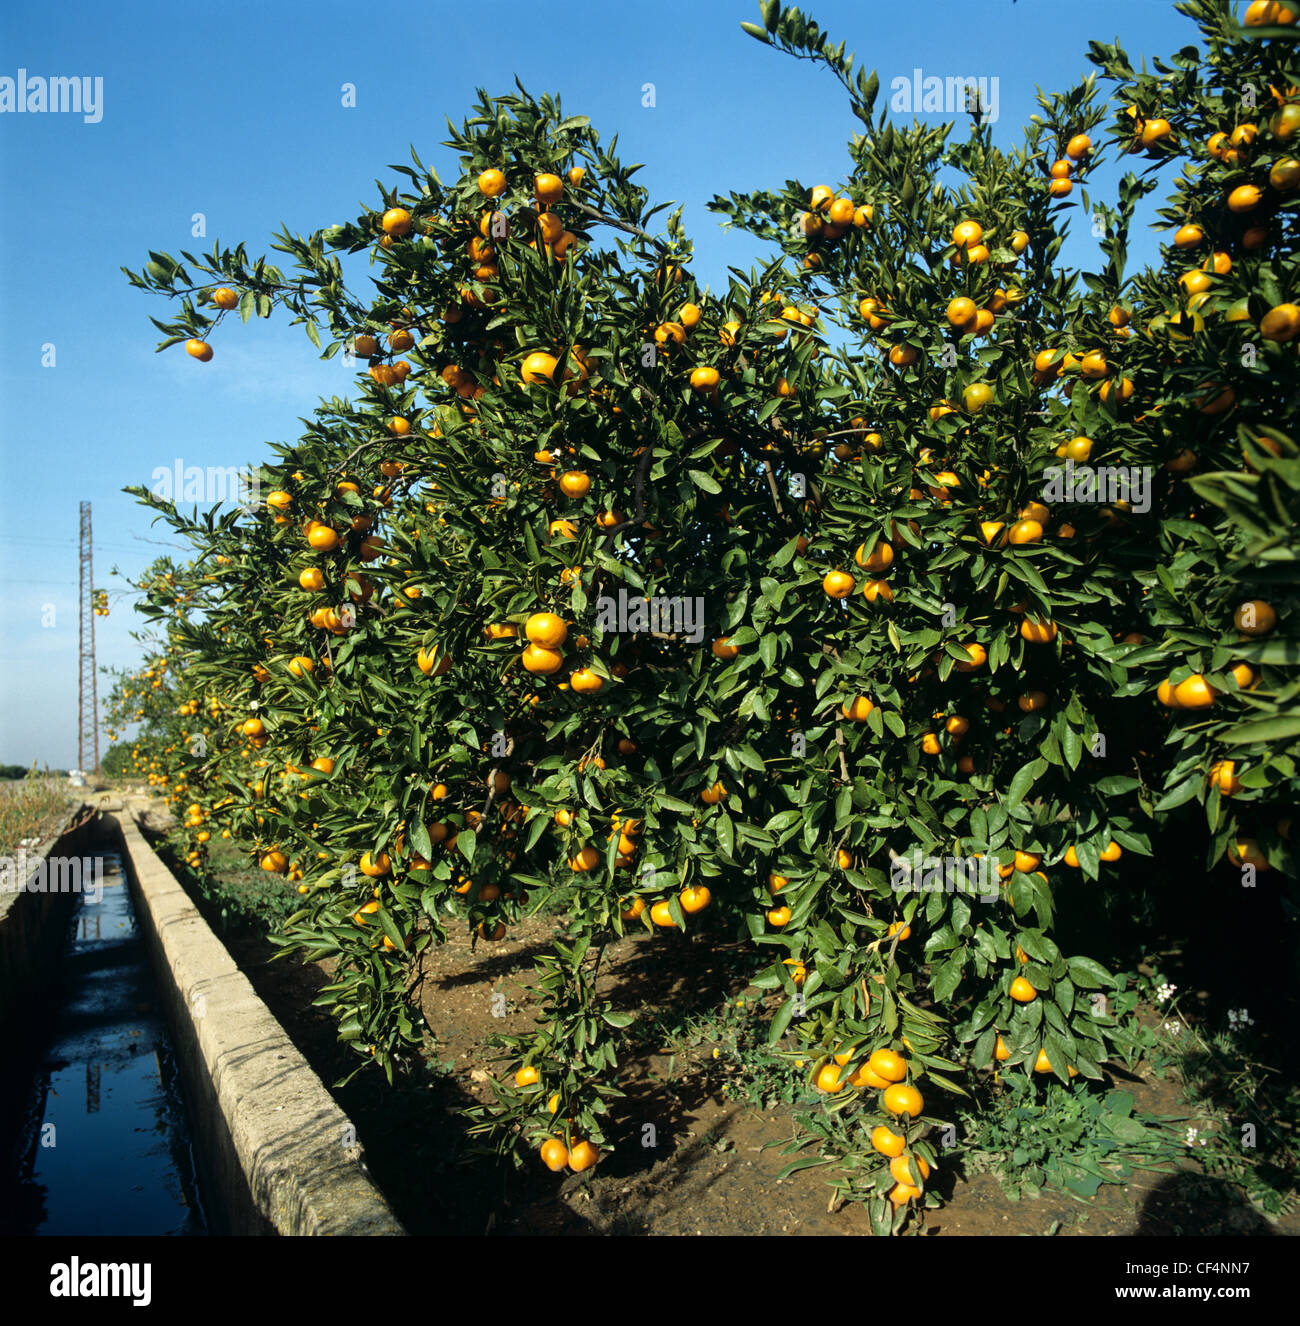 Clementines ripe on the trees beside an irrigation canal near Valencia, Spain Stock Photo